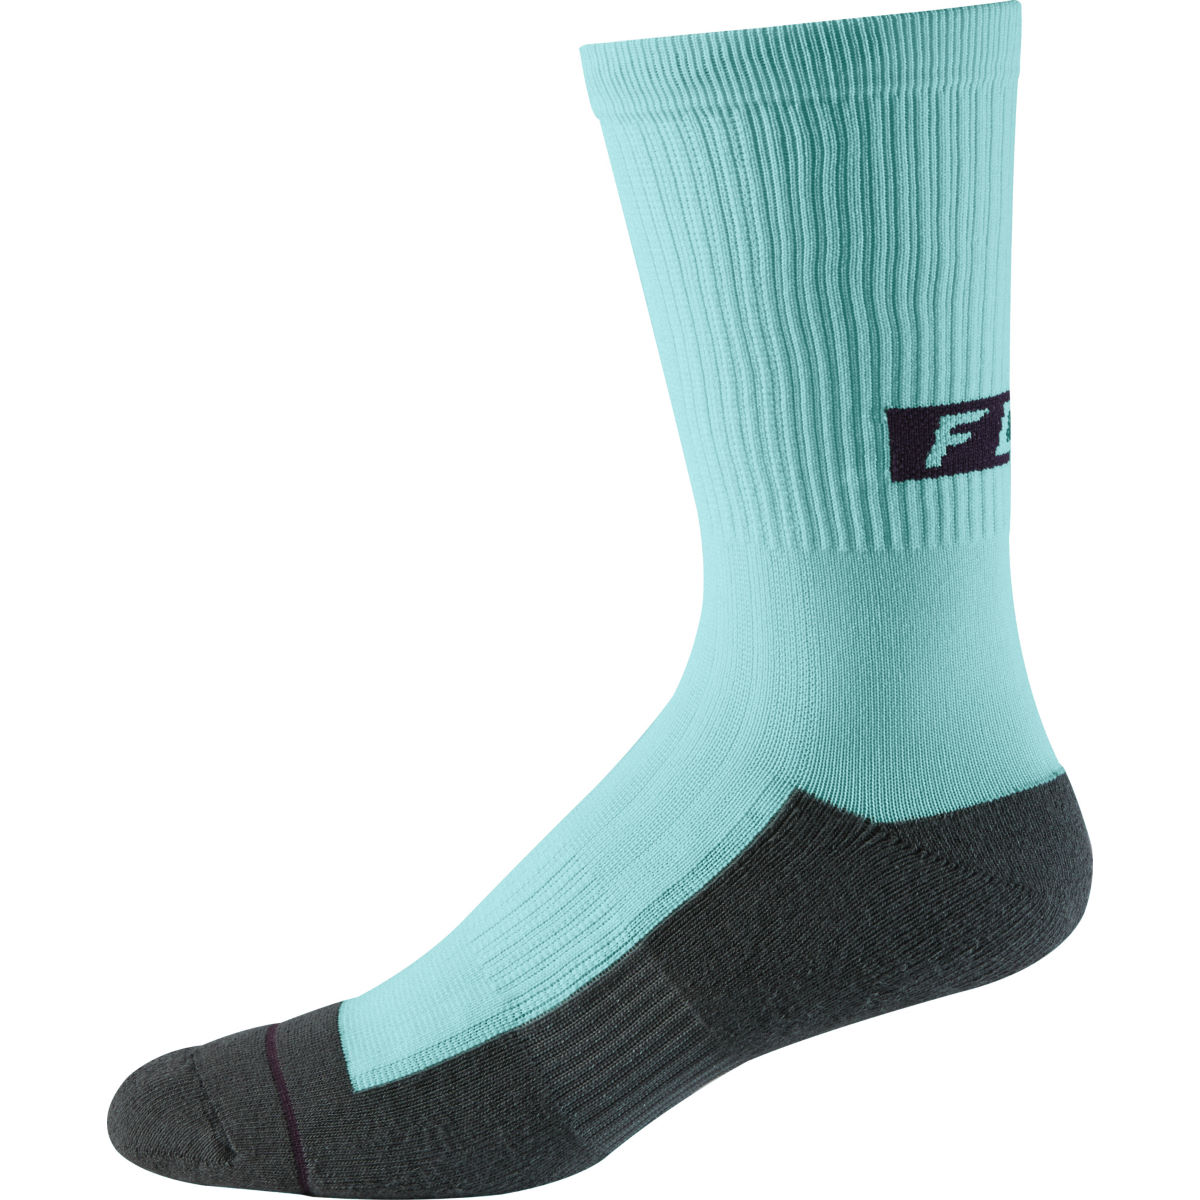 Calcetines Fox Racing  8 Trail - Calcetines